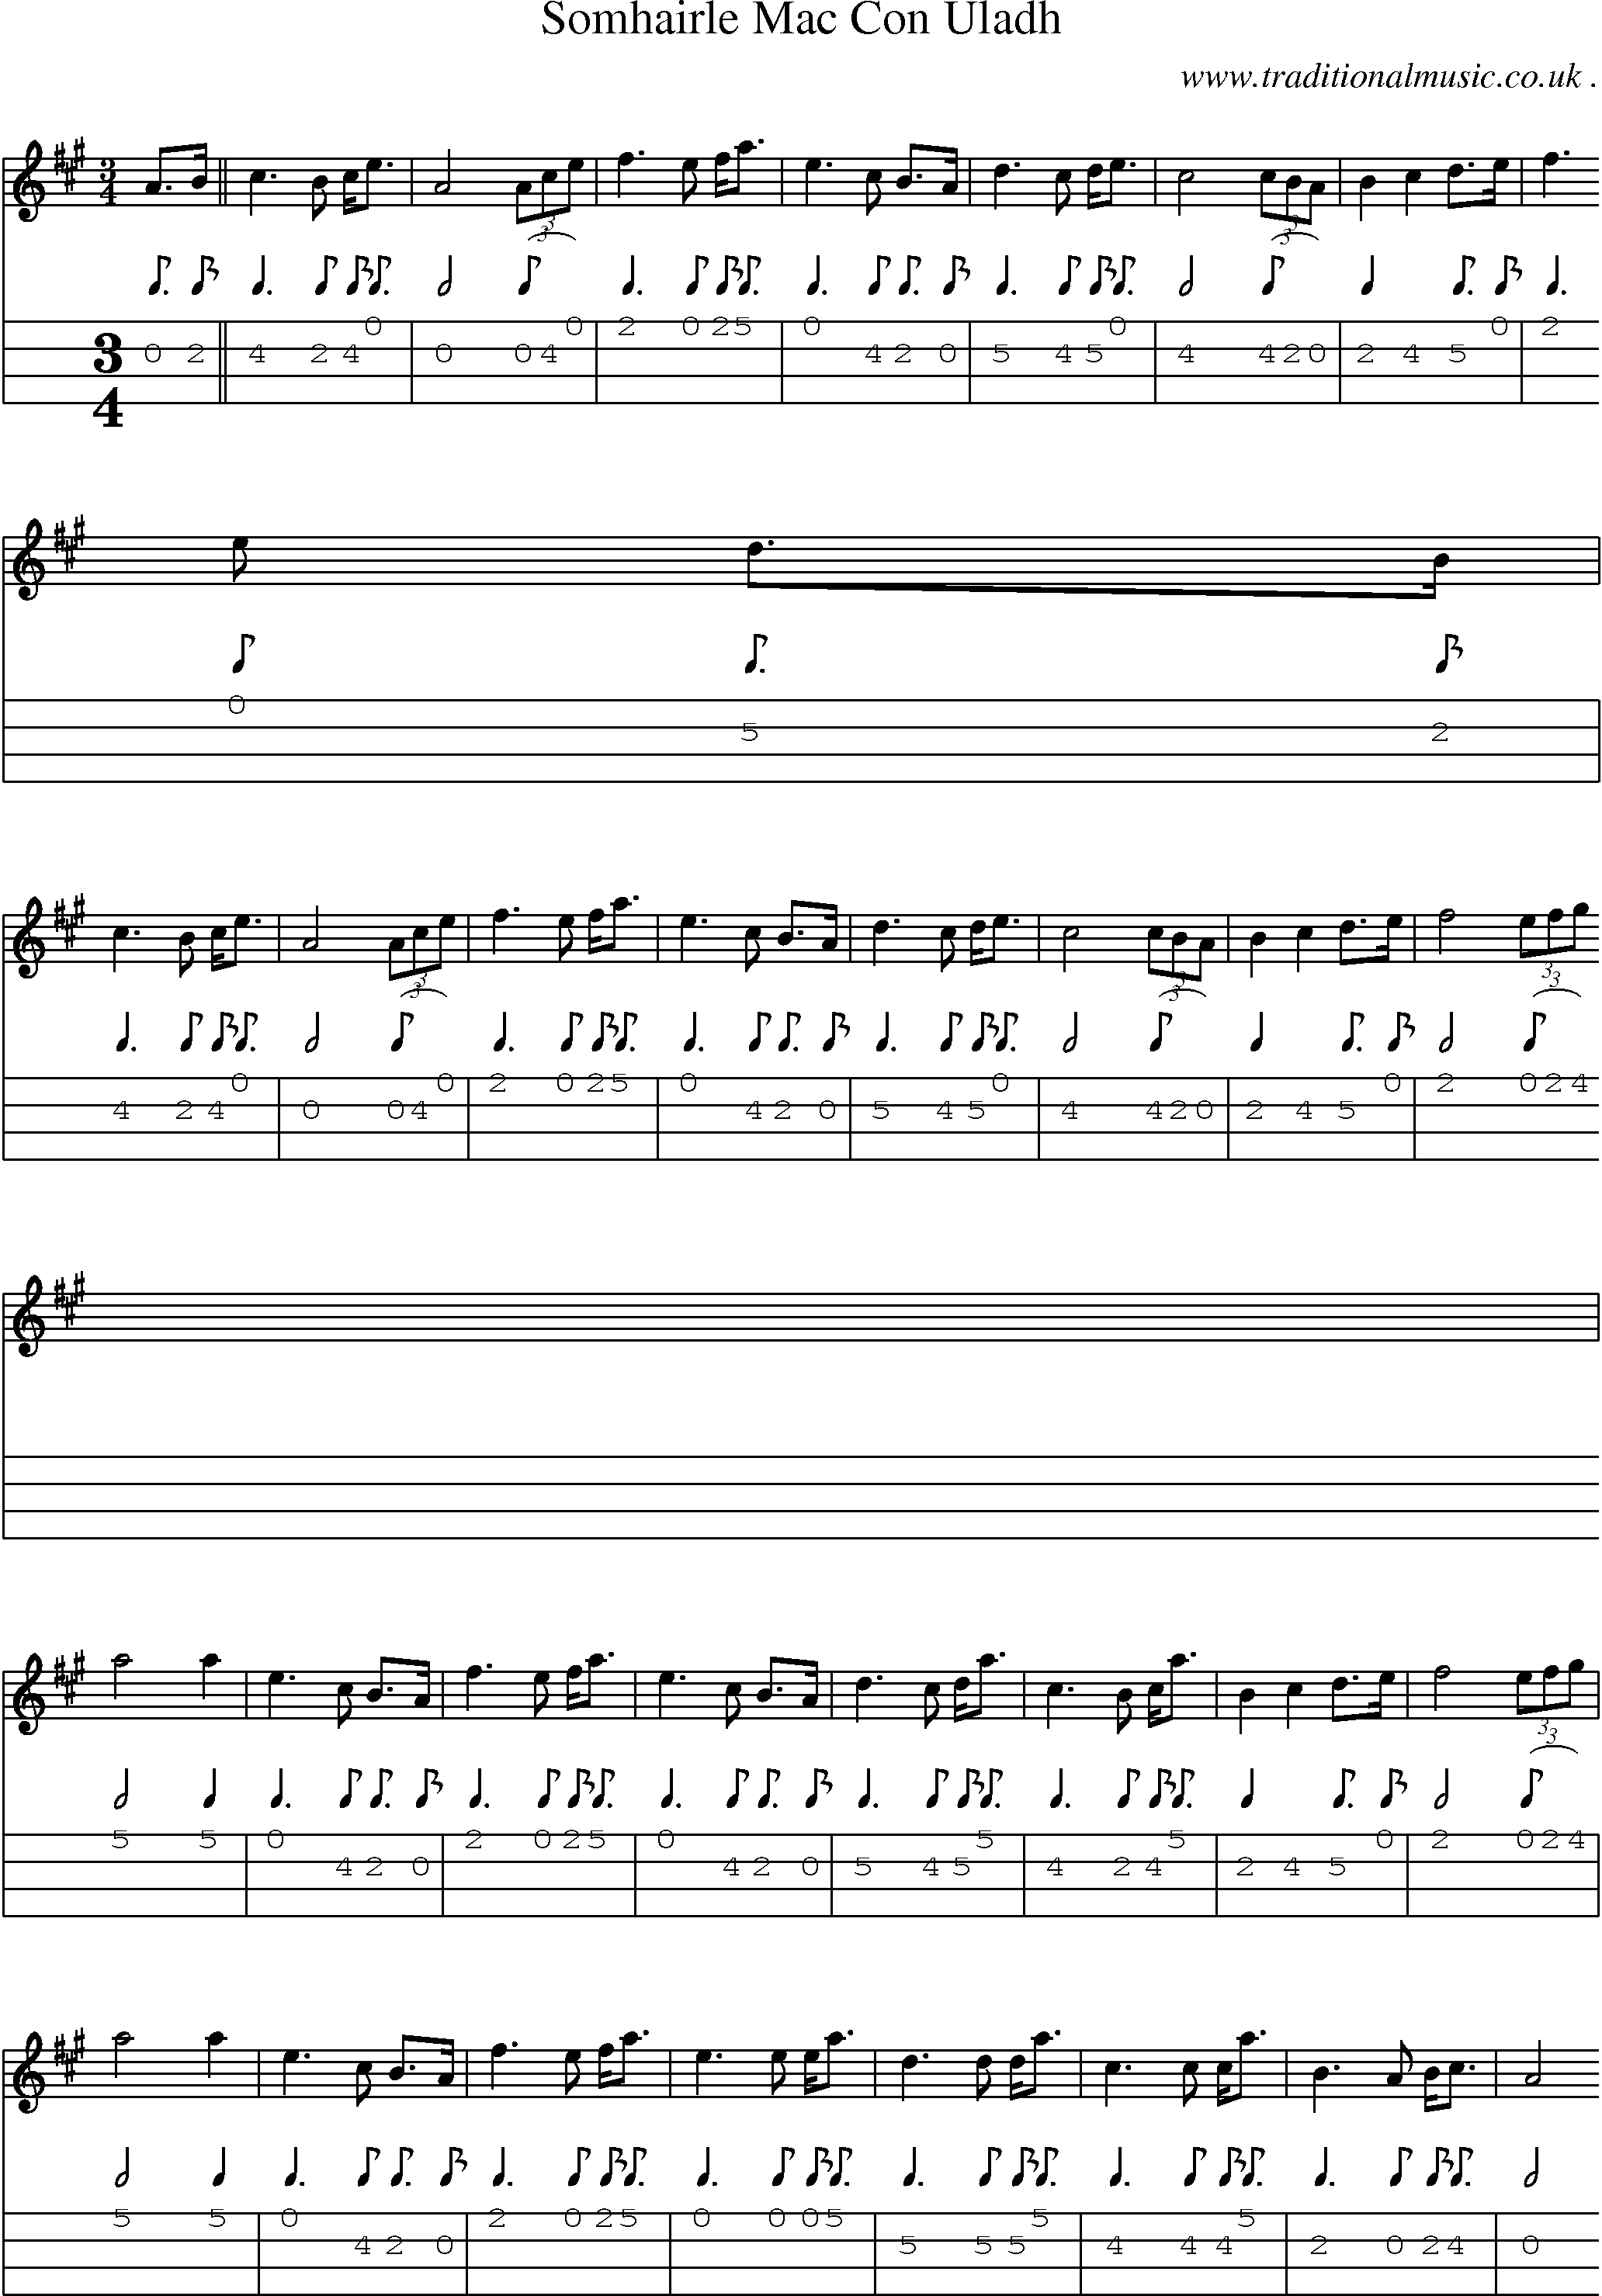 Sheet-Music and Mandolin Tabs for Somhairle Mac Con Uladh